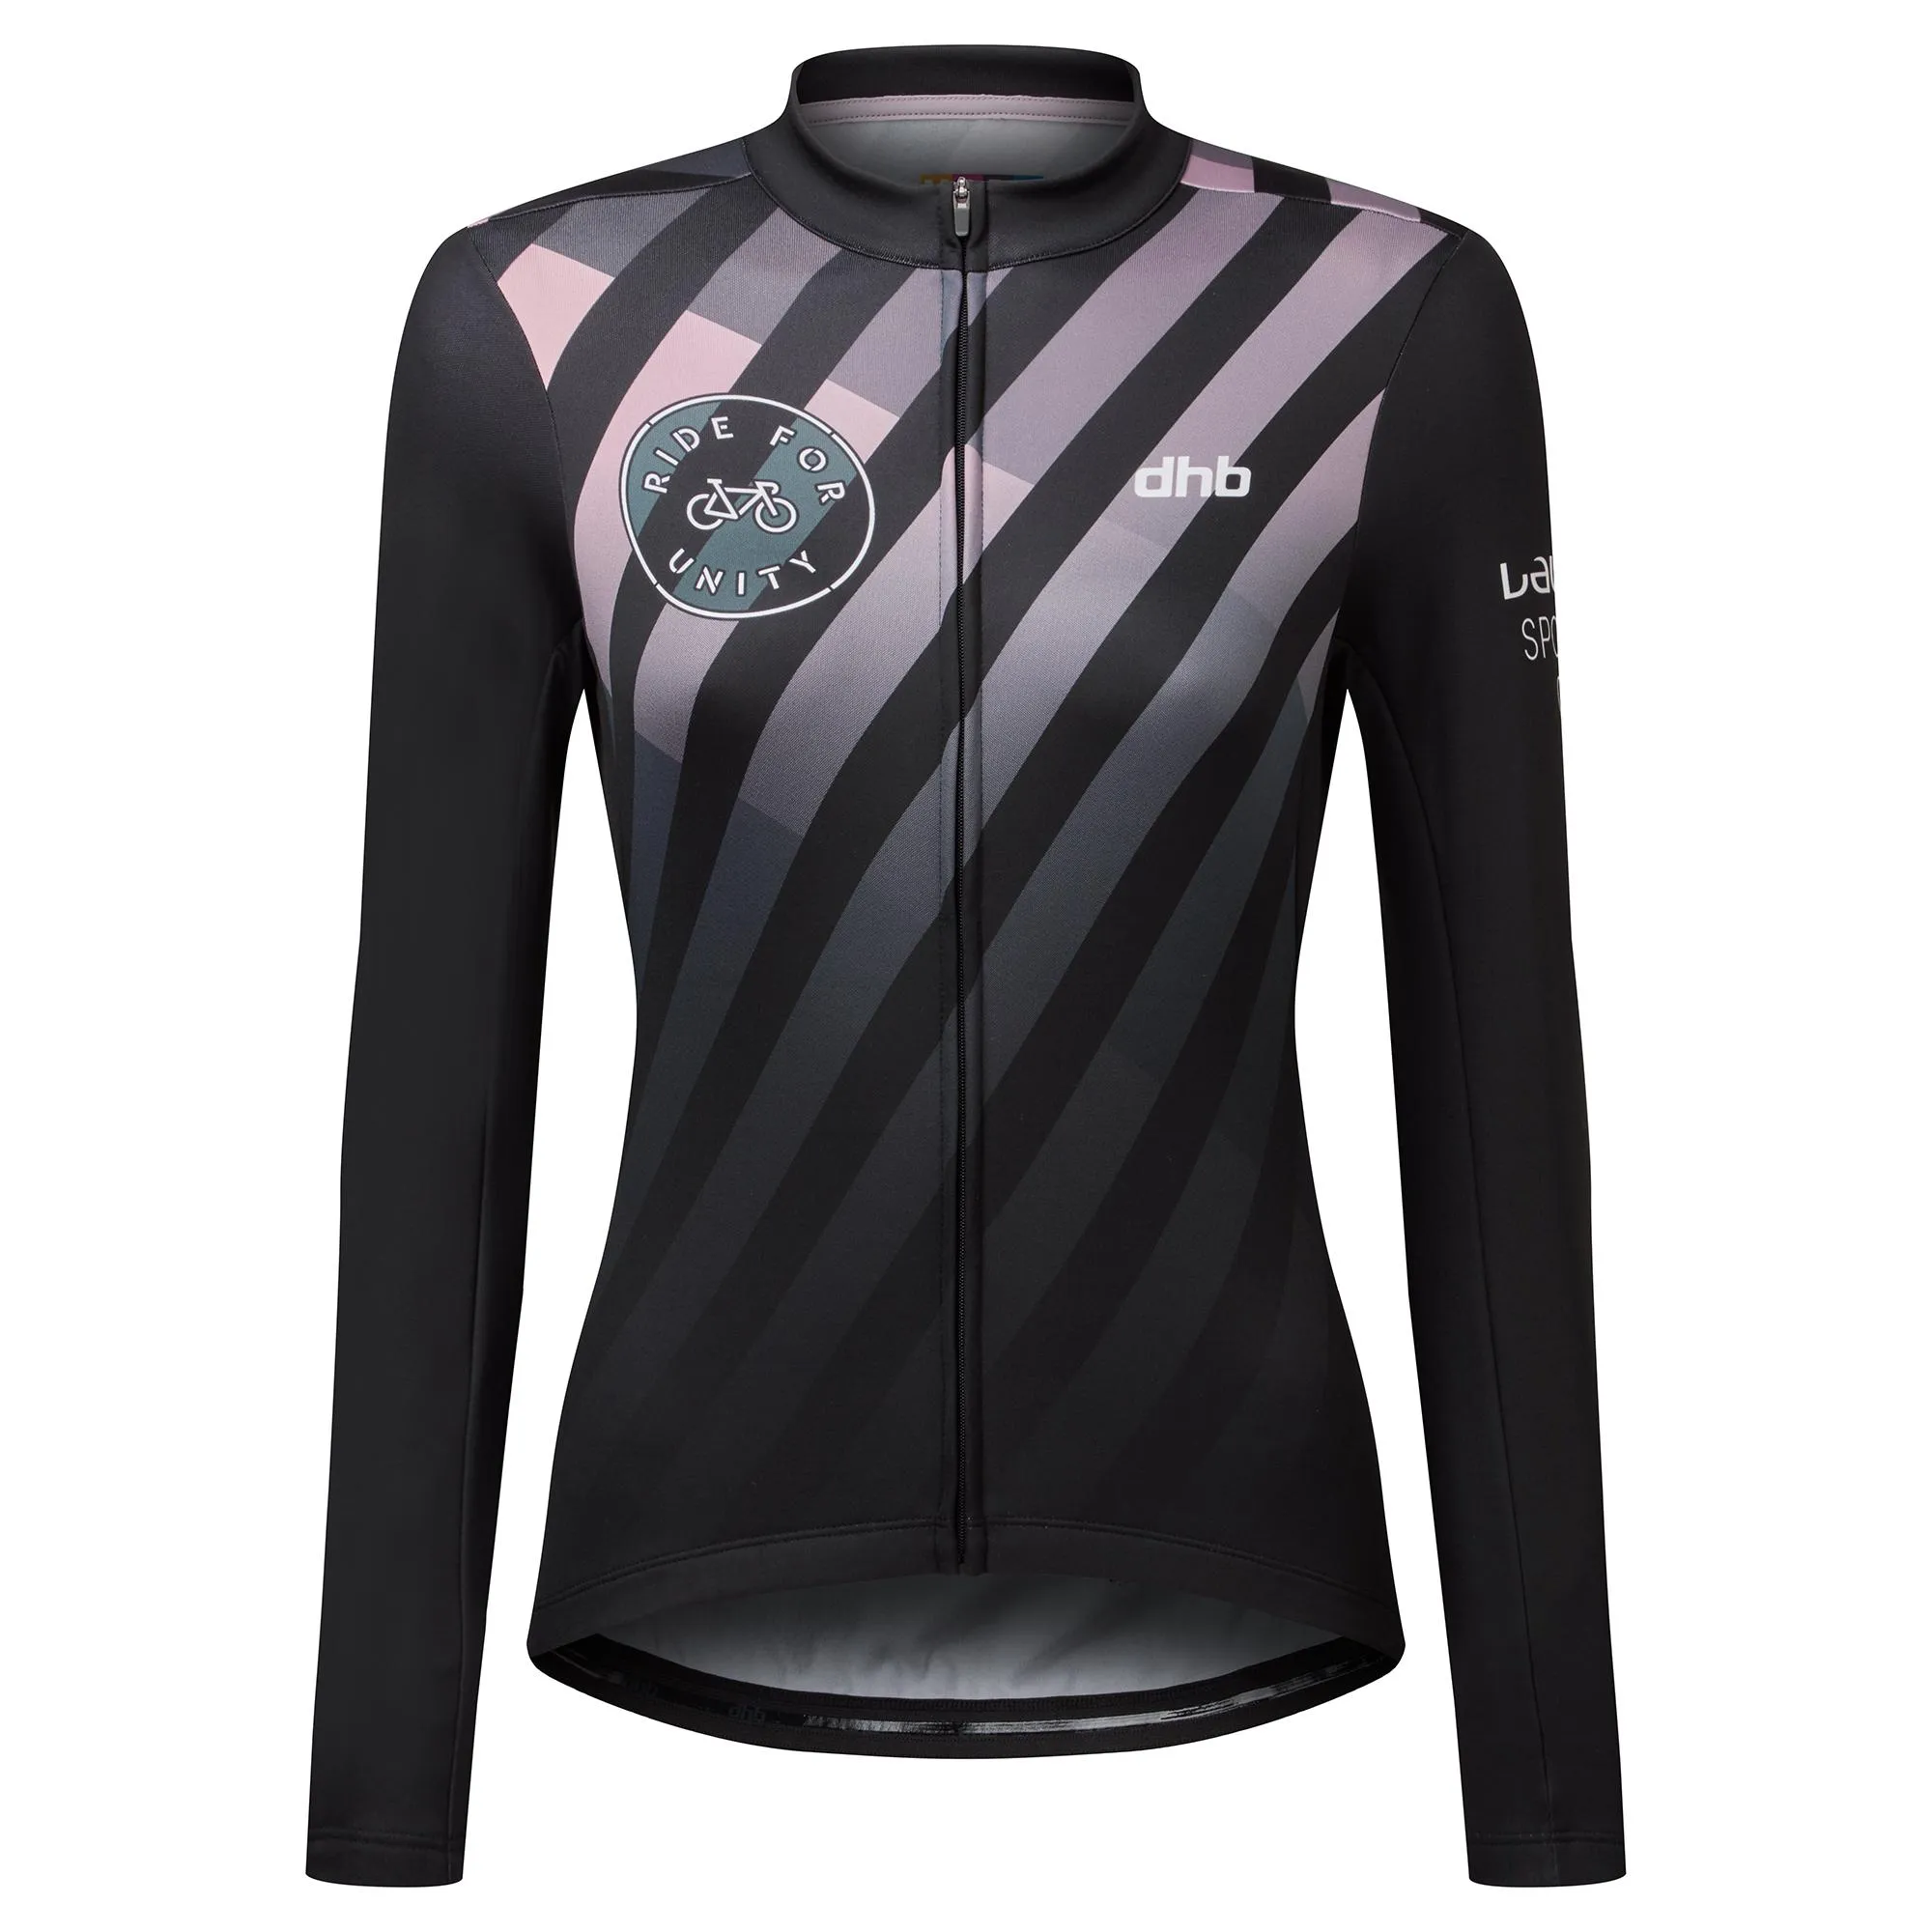 dhb Ride for Unity Women's Long Sleeve Jersey, Black/Pink